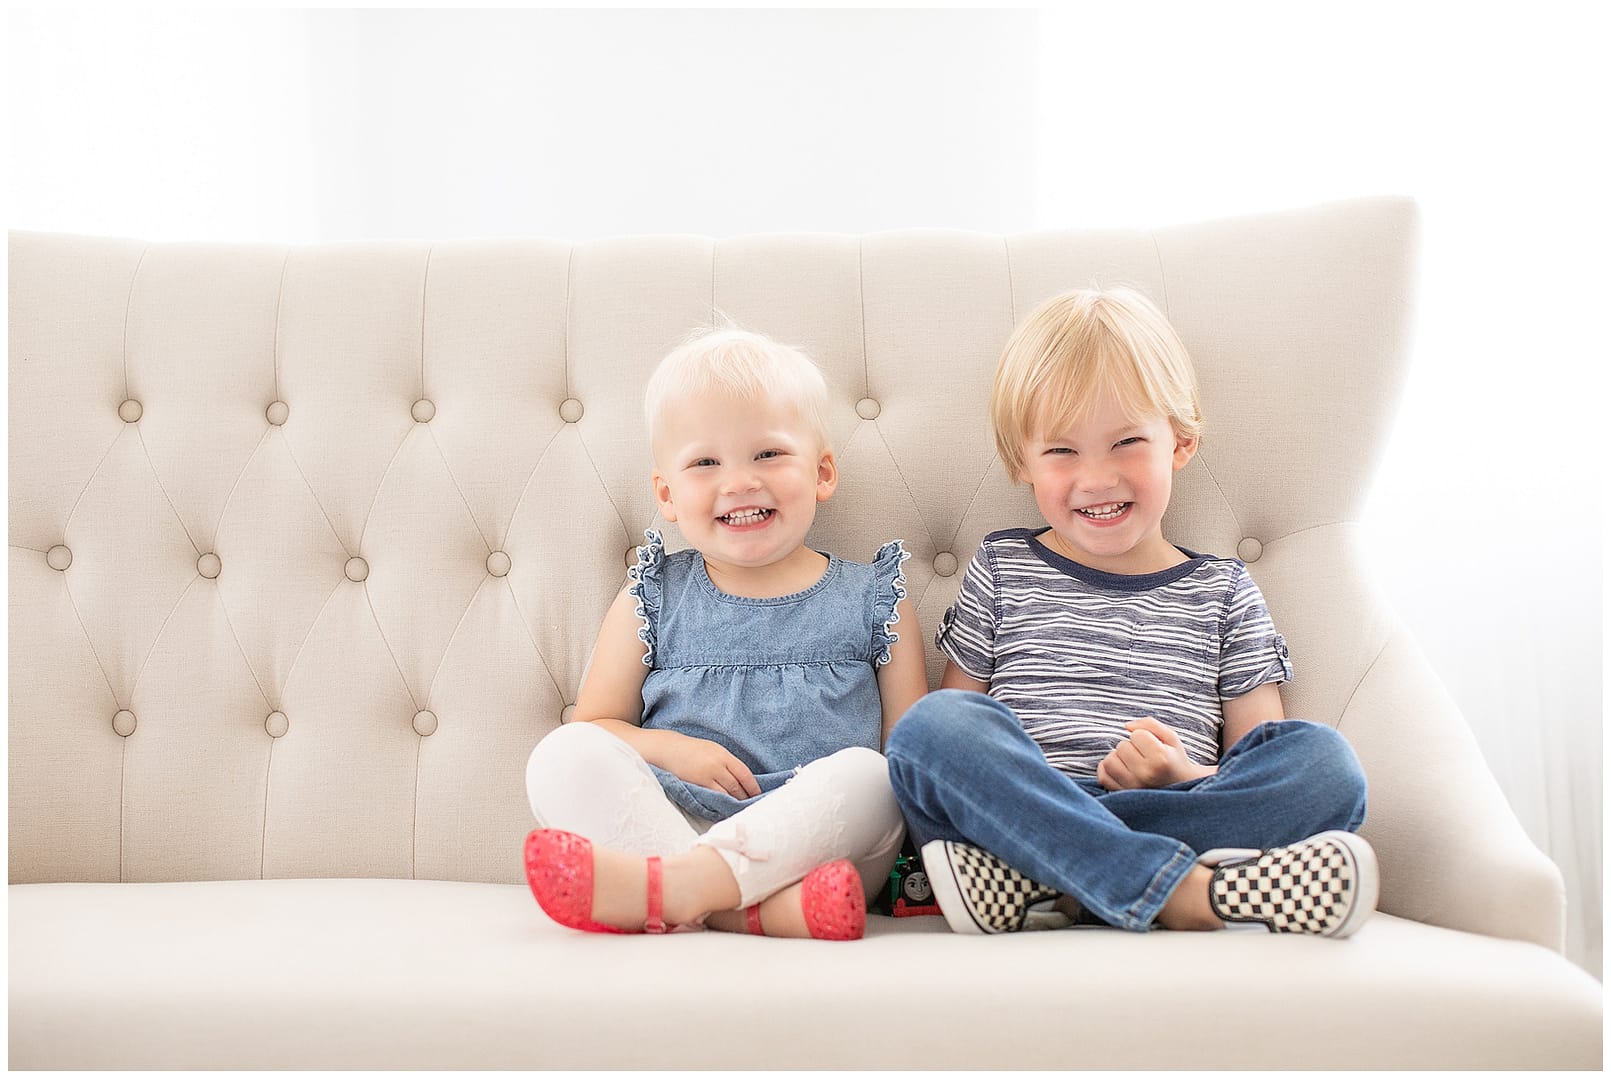 Children smile for portrait in studio. Photos by Tiffany Hix Photography.